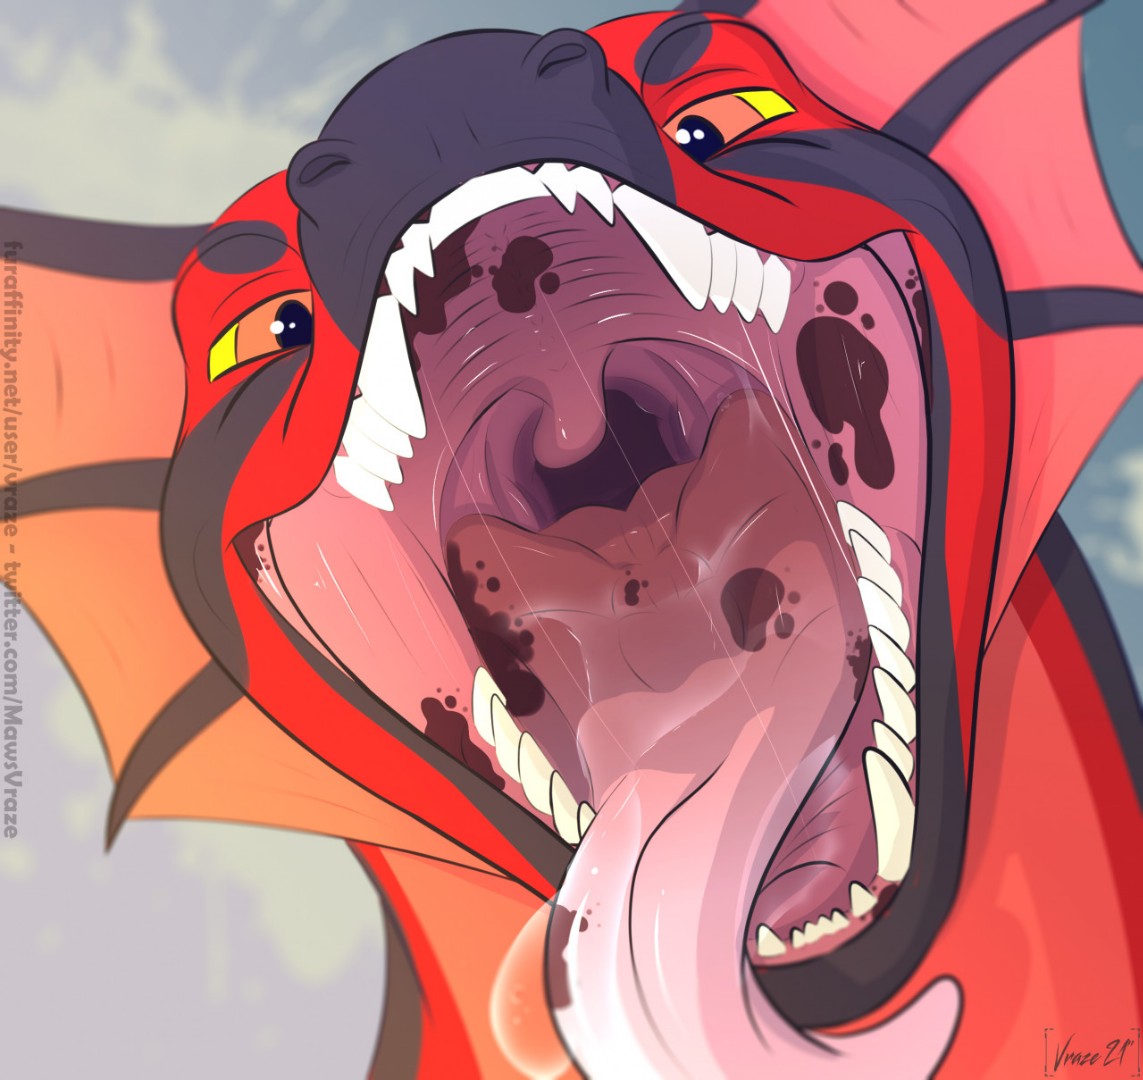 FIRE maw ych by Endemy21 -- Fur Affinity [dot] net